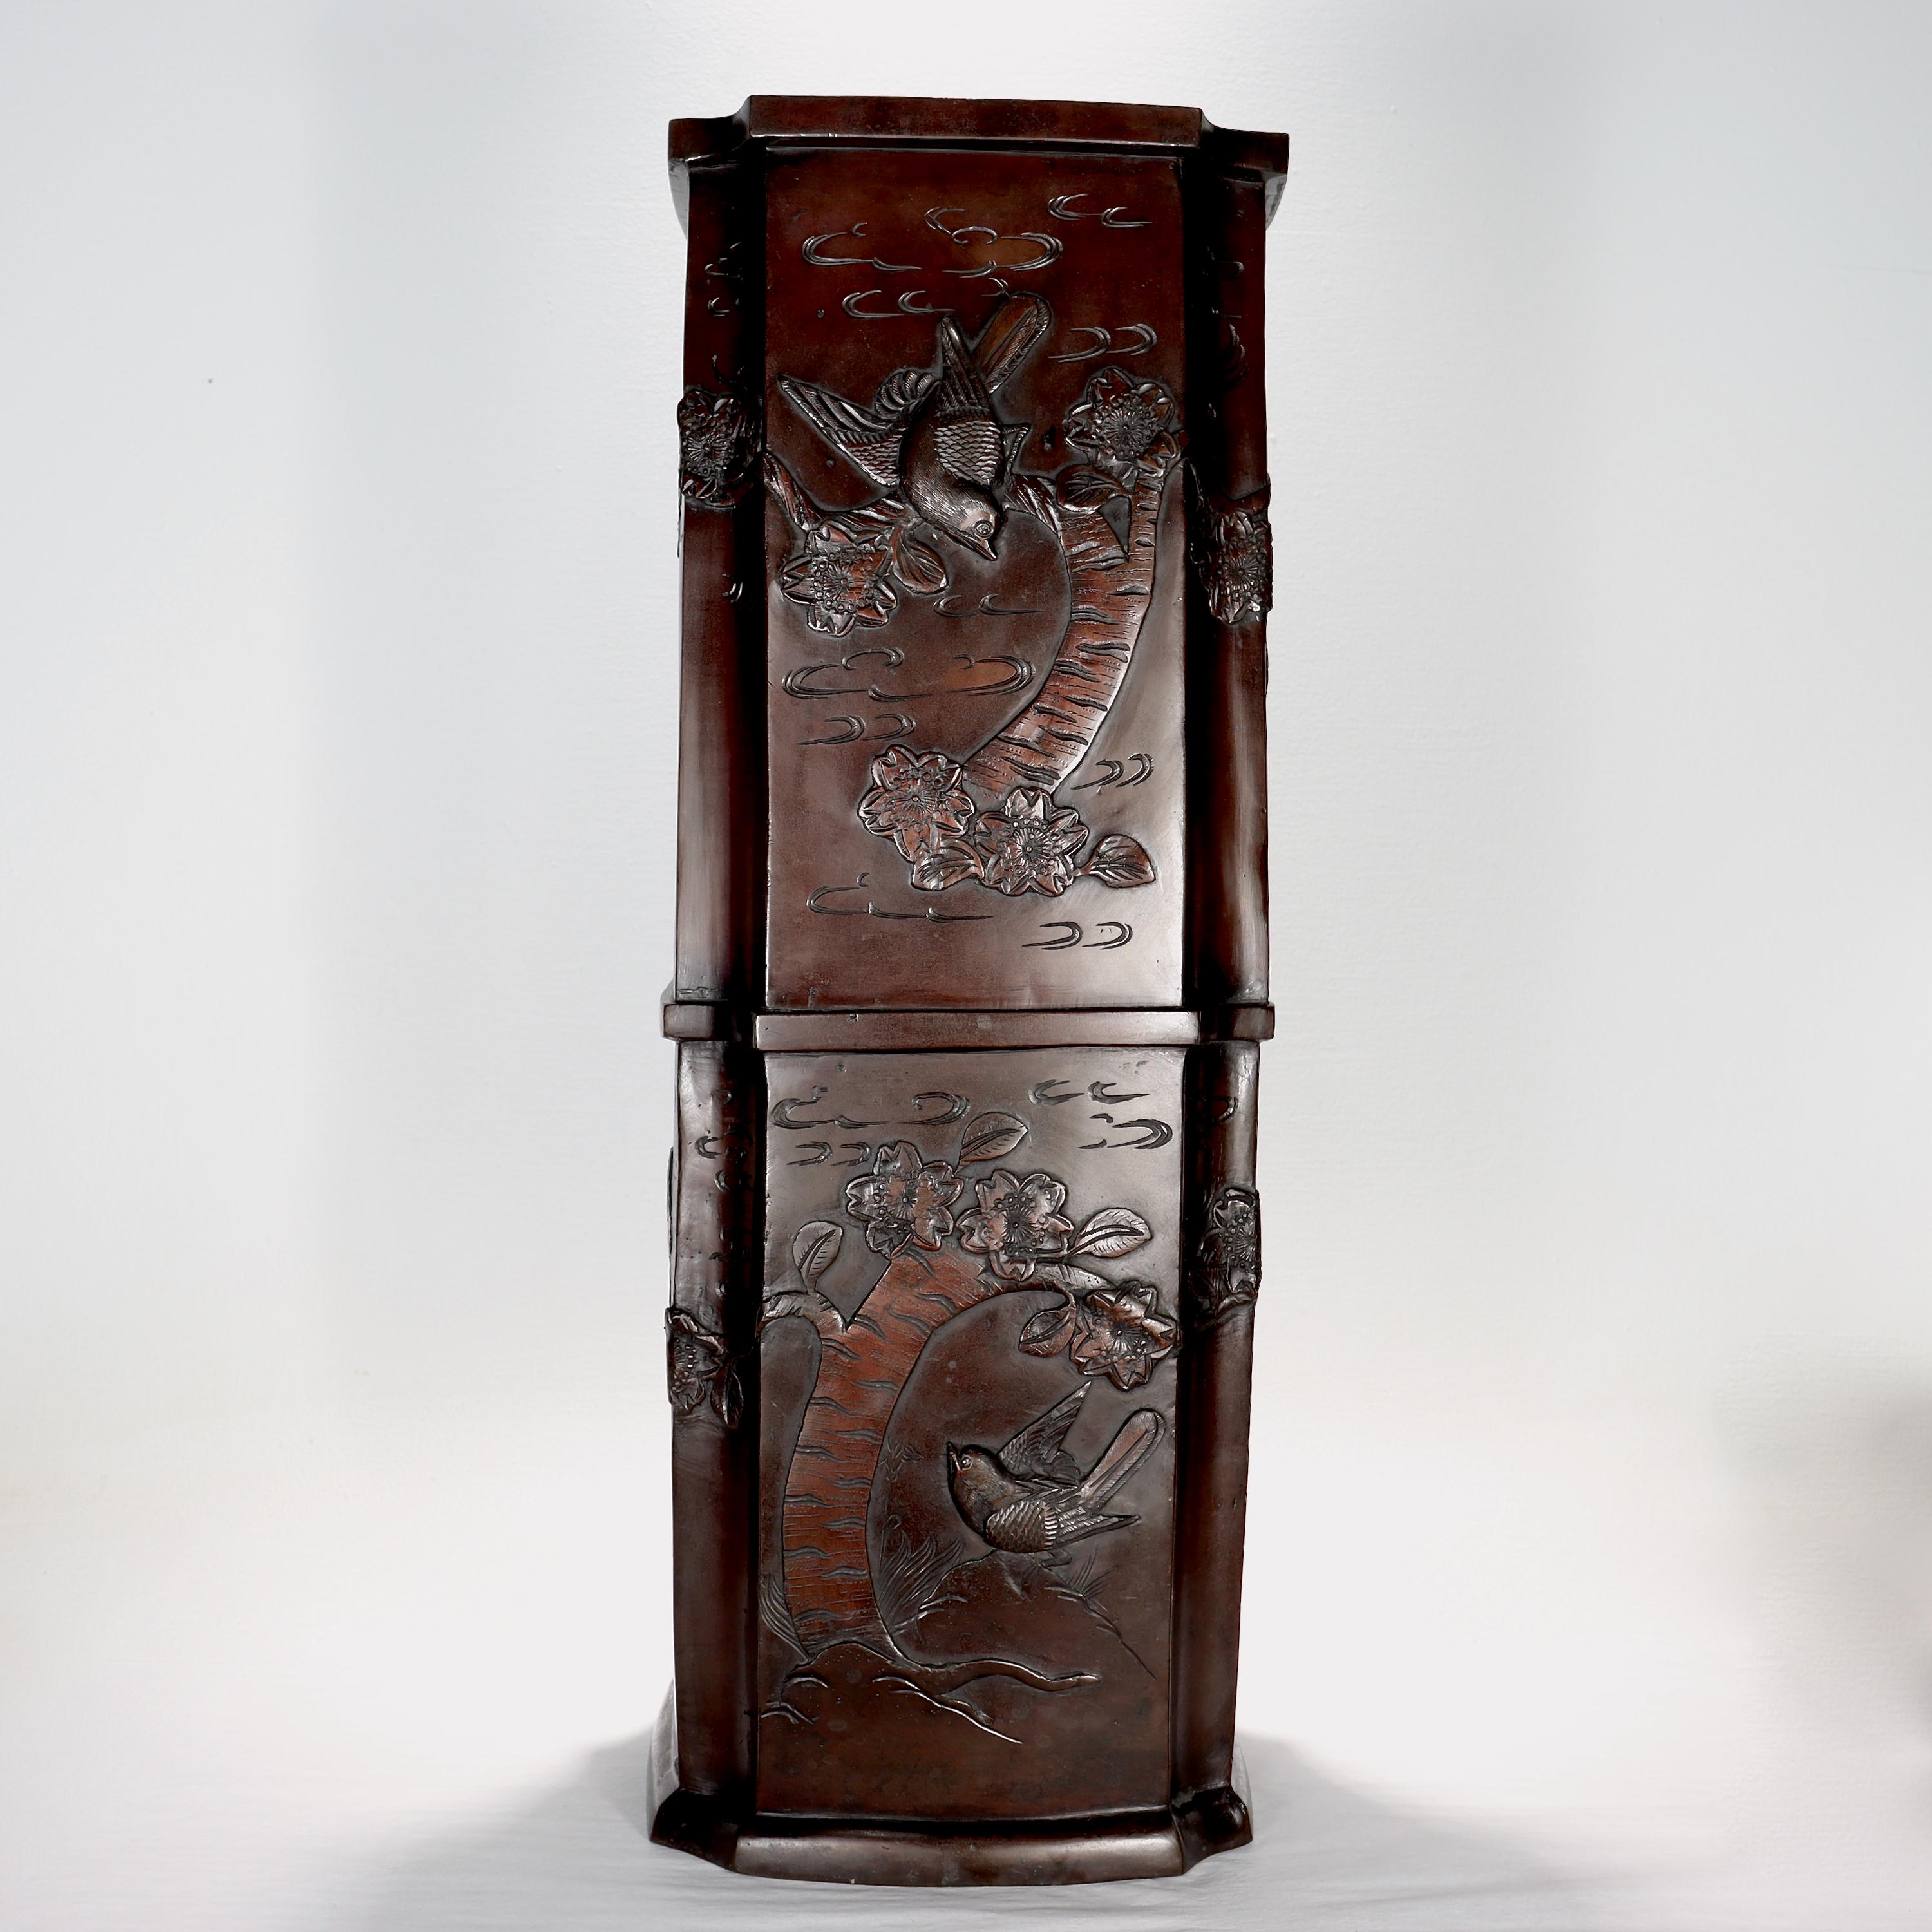 A fine old or antique Japanese bronze umbrella stand.

Decorated throughout with raised birds & flowers among a background of minimalist clouds.

With a warm chocolate brown patina (and lighter accents in the clouds).

Simply a great Japanese